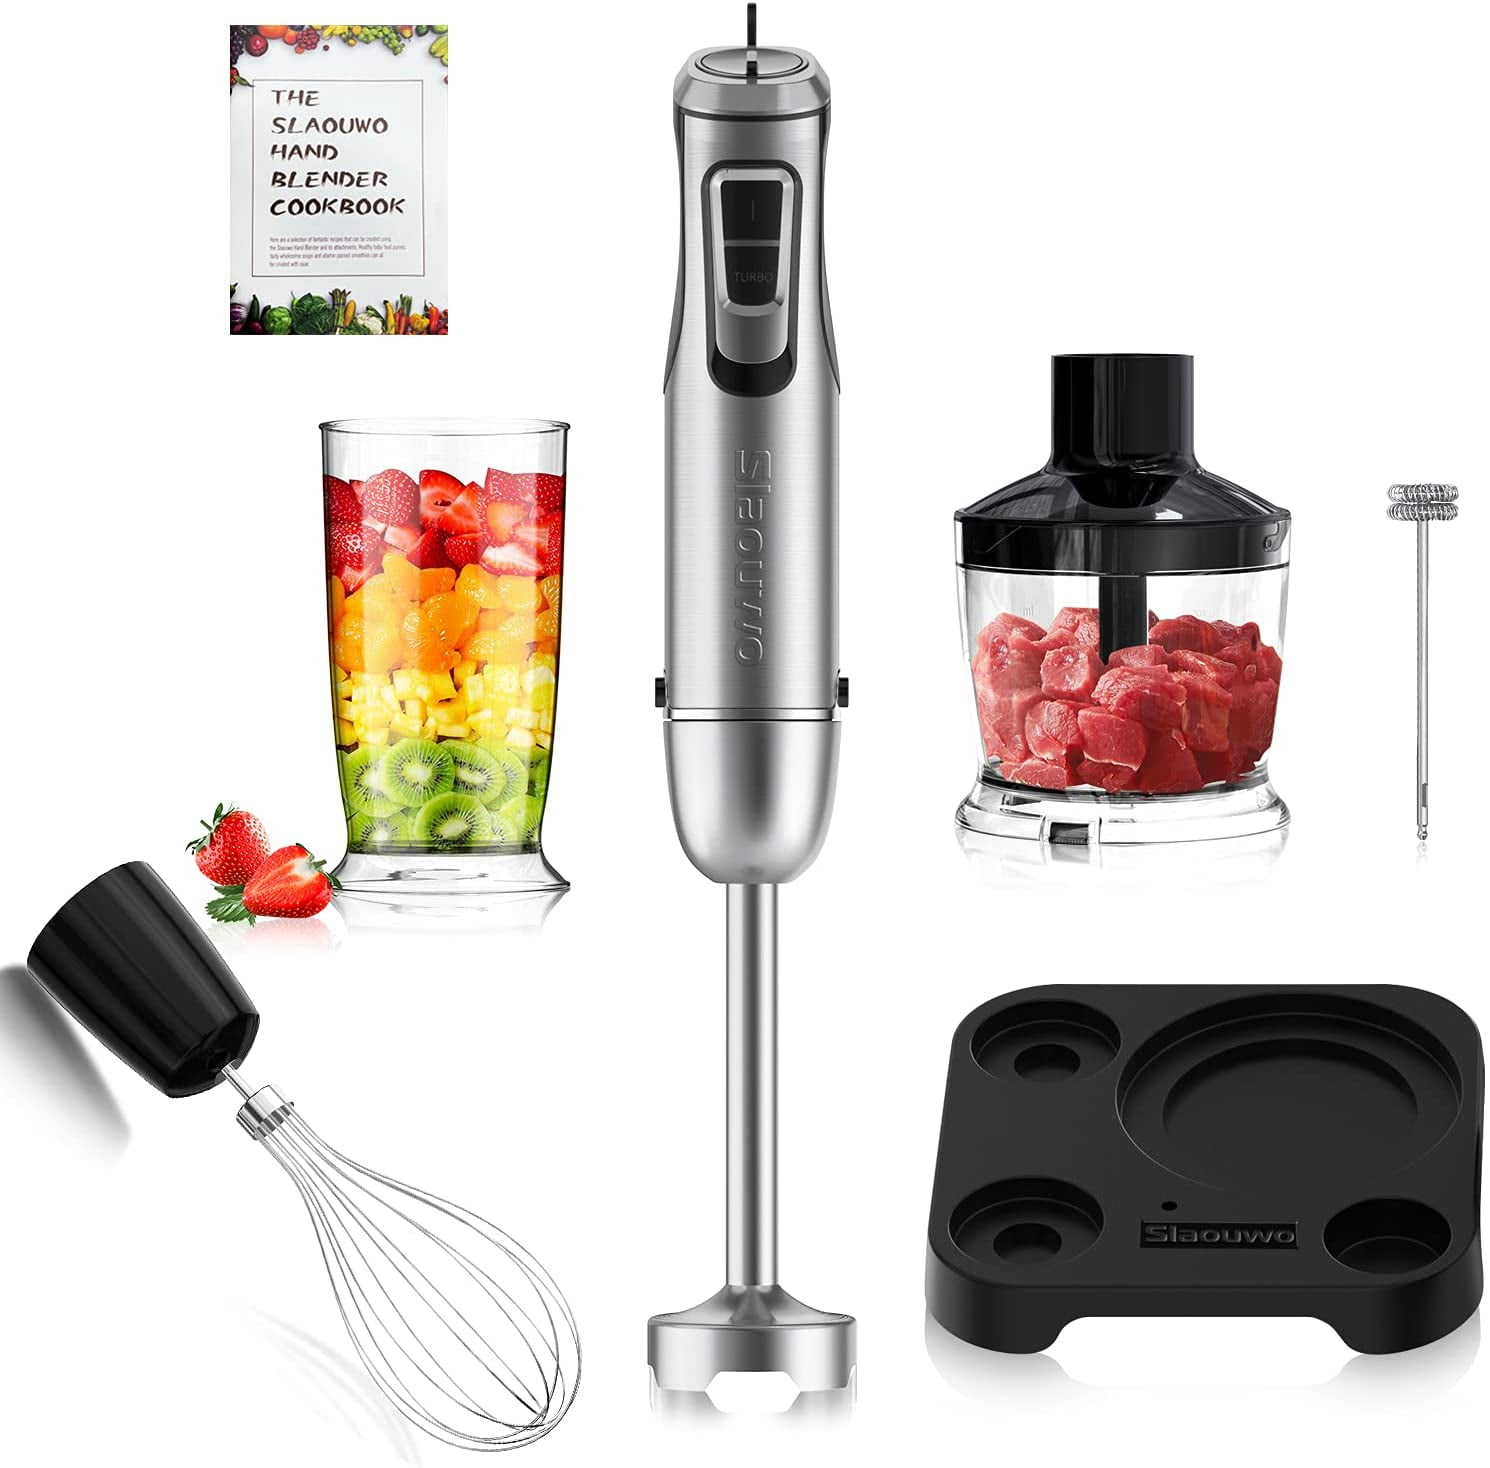 VIVEFOX Immersion Blender 6-in-1 800W 10 Speed Control Multifunctional Electric Blender with Stainless Steel - Walmart.com